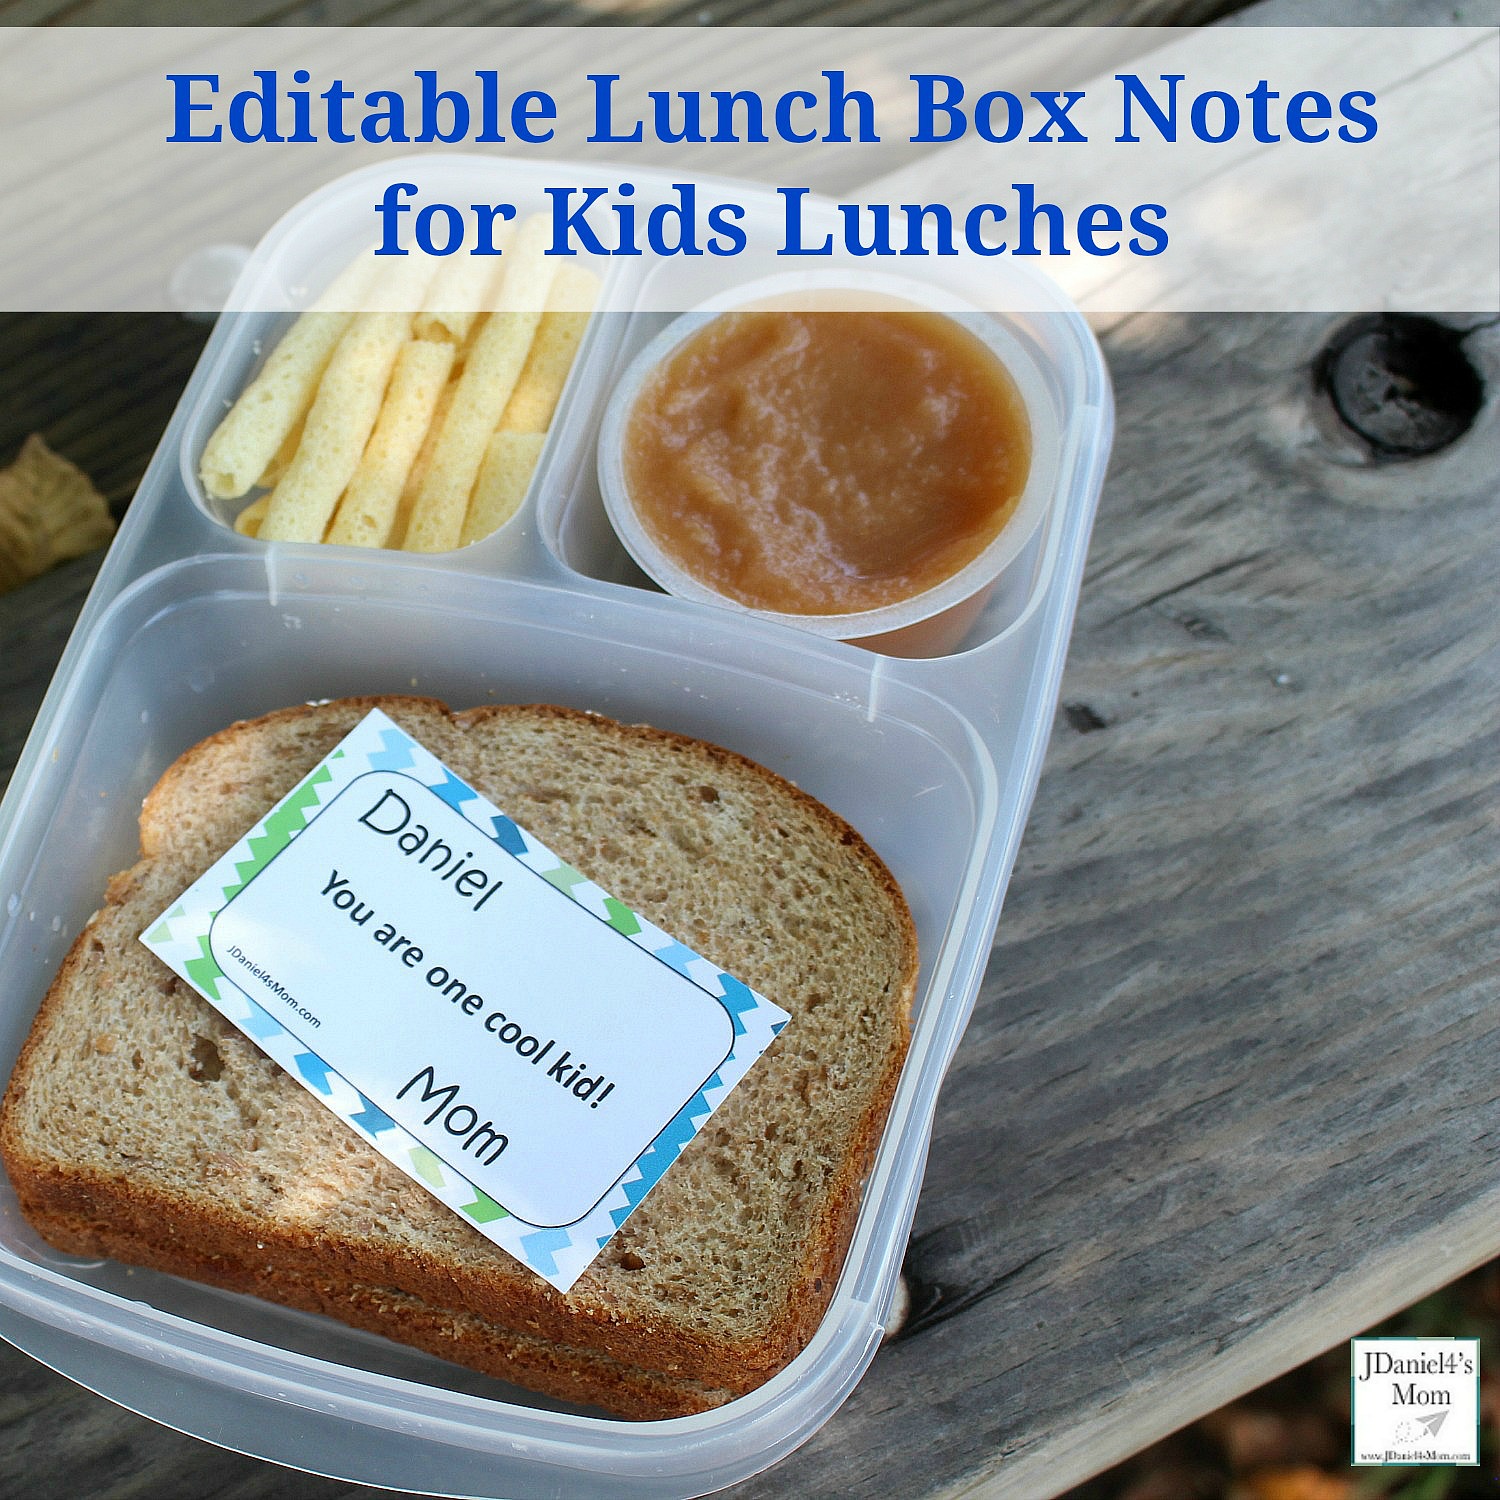 You can personalized these encouraging lunch box notes with your child's name and with your name.